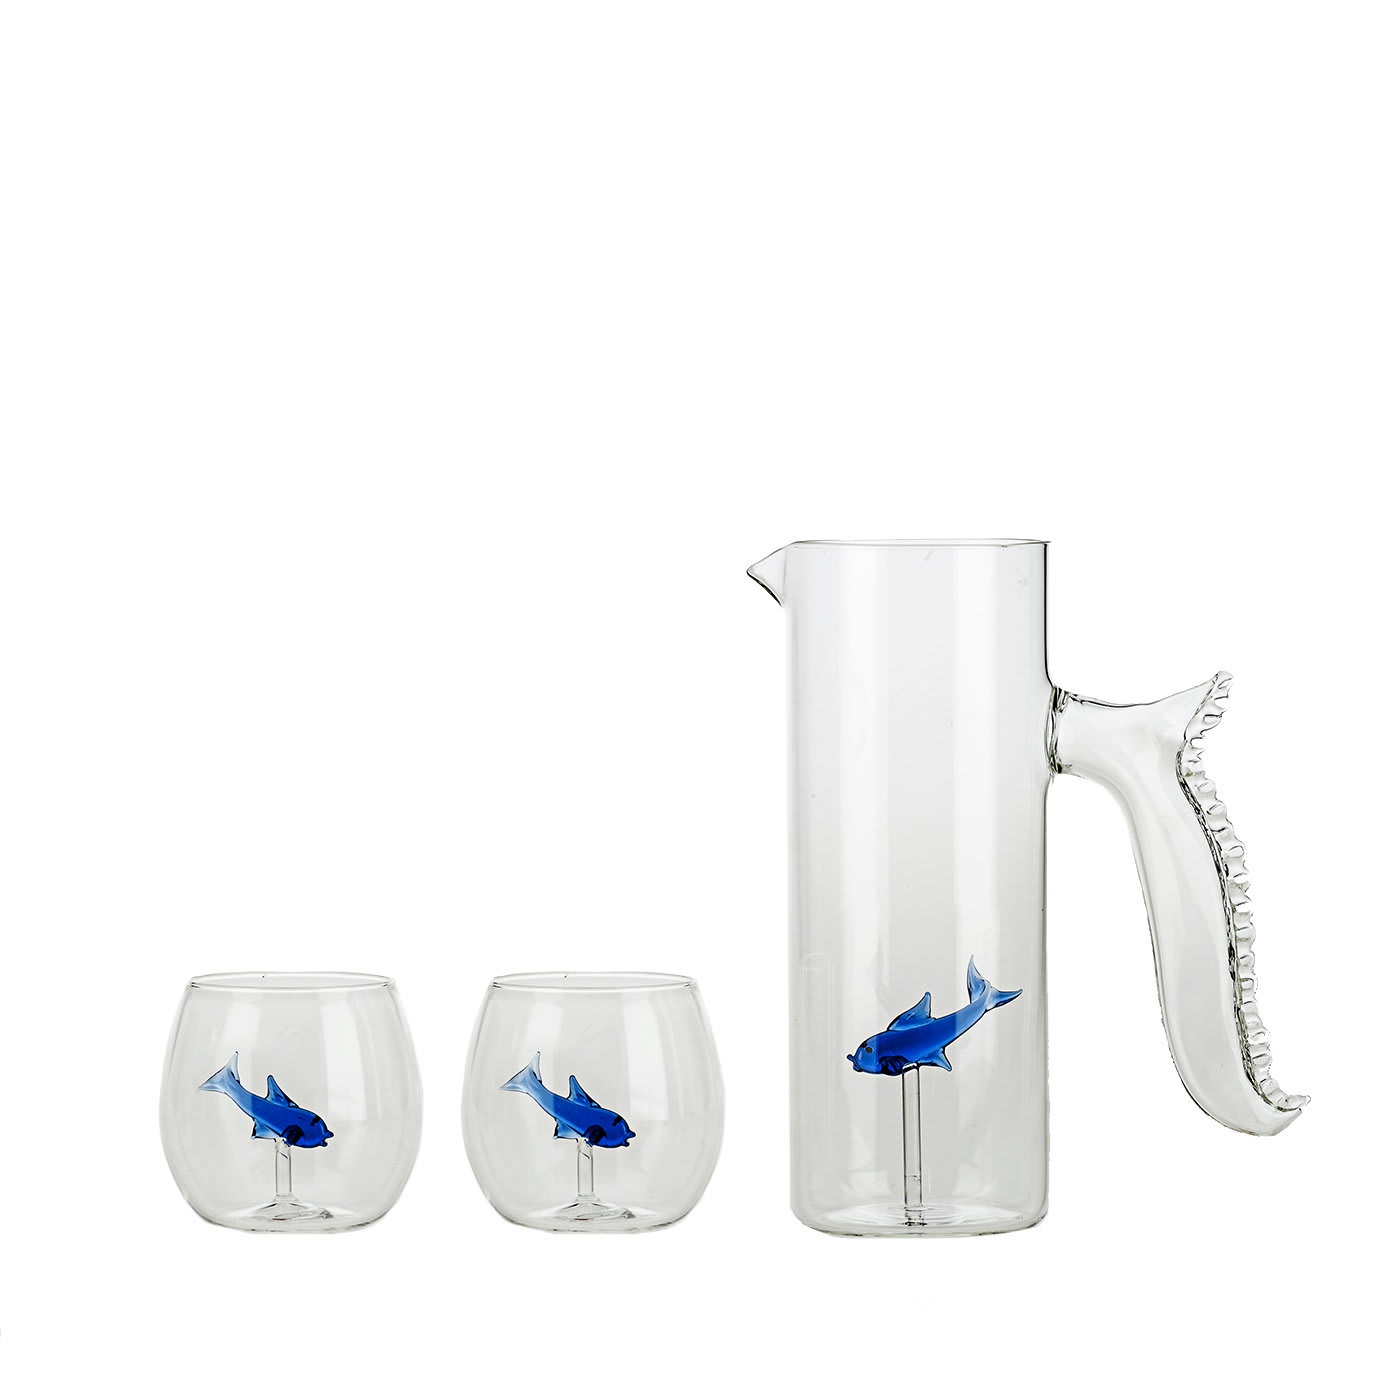 Set of Little Blue Fish Pitcher and Four Rounded Little Blue Fish Glasses - Casarialto